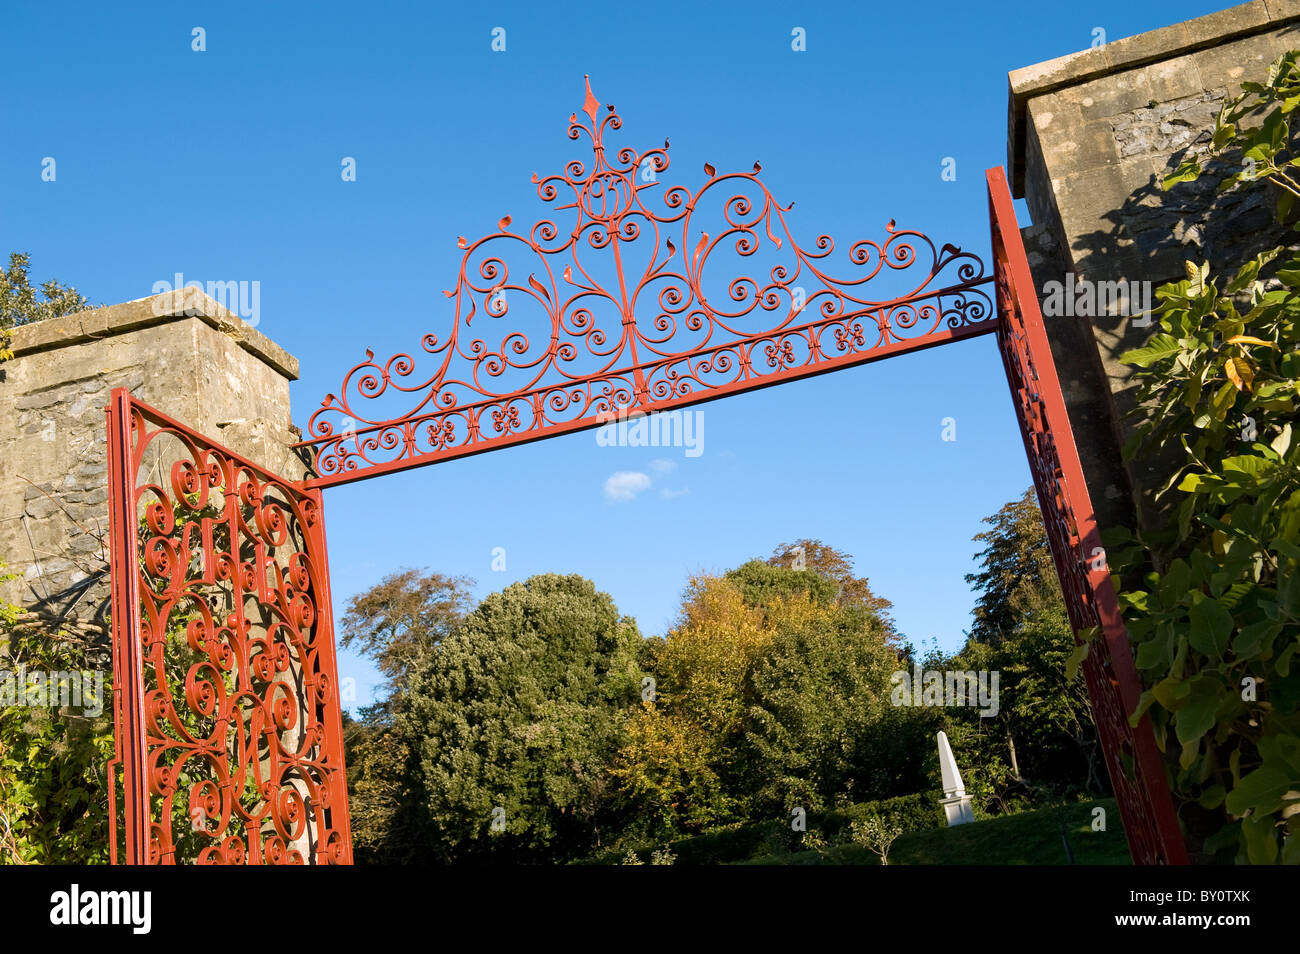 Red intricate wrought iron entrance gate to Arundel Castle Gardens 'The Collector Earl's garden', Erected 1937, West Sussex, UK Stock Photo